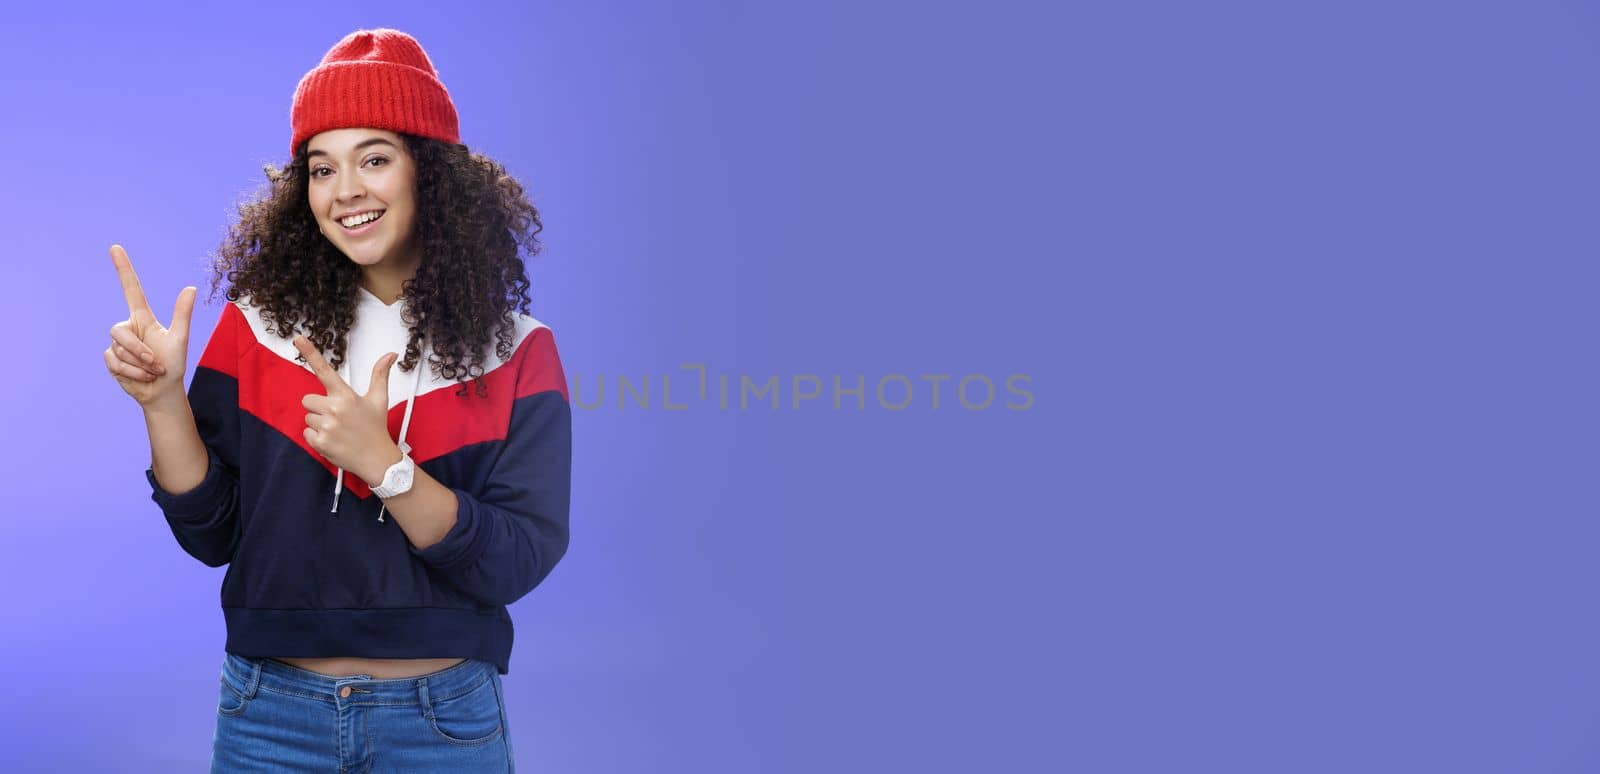 Portrait of friendly good-looking woman with curly hair in red warm beanie pointing at upper left corner and smiling delighted as promoting cool copy space against blue background by Benzoix